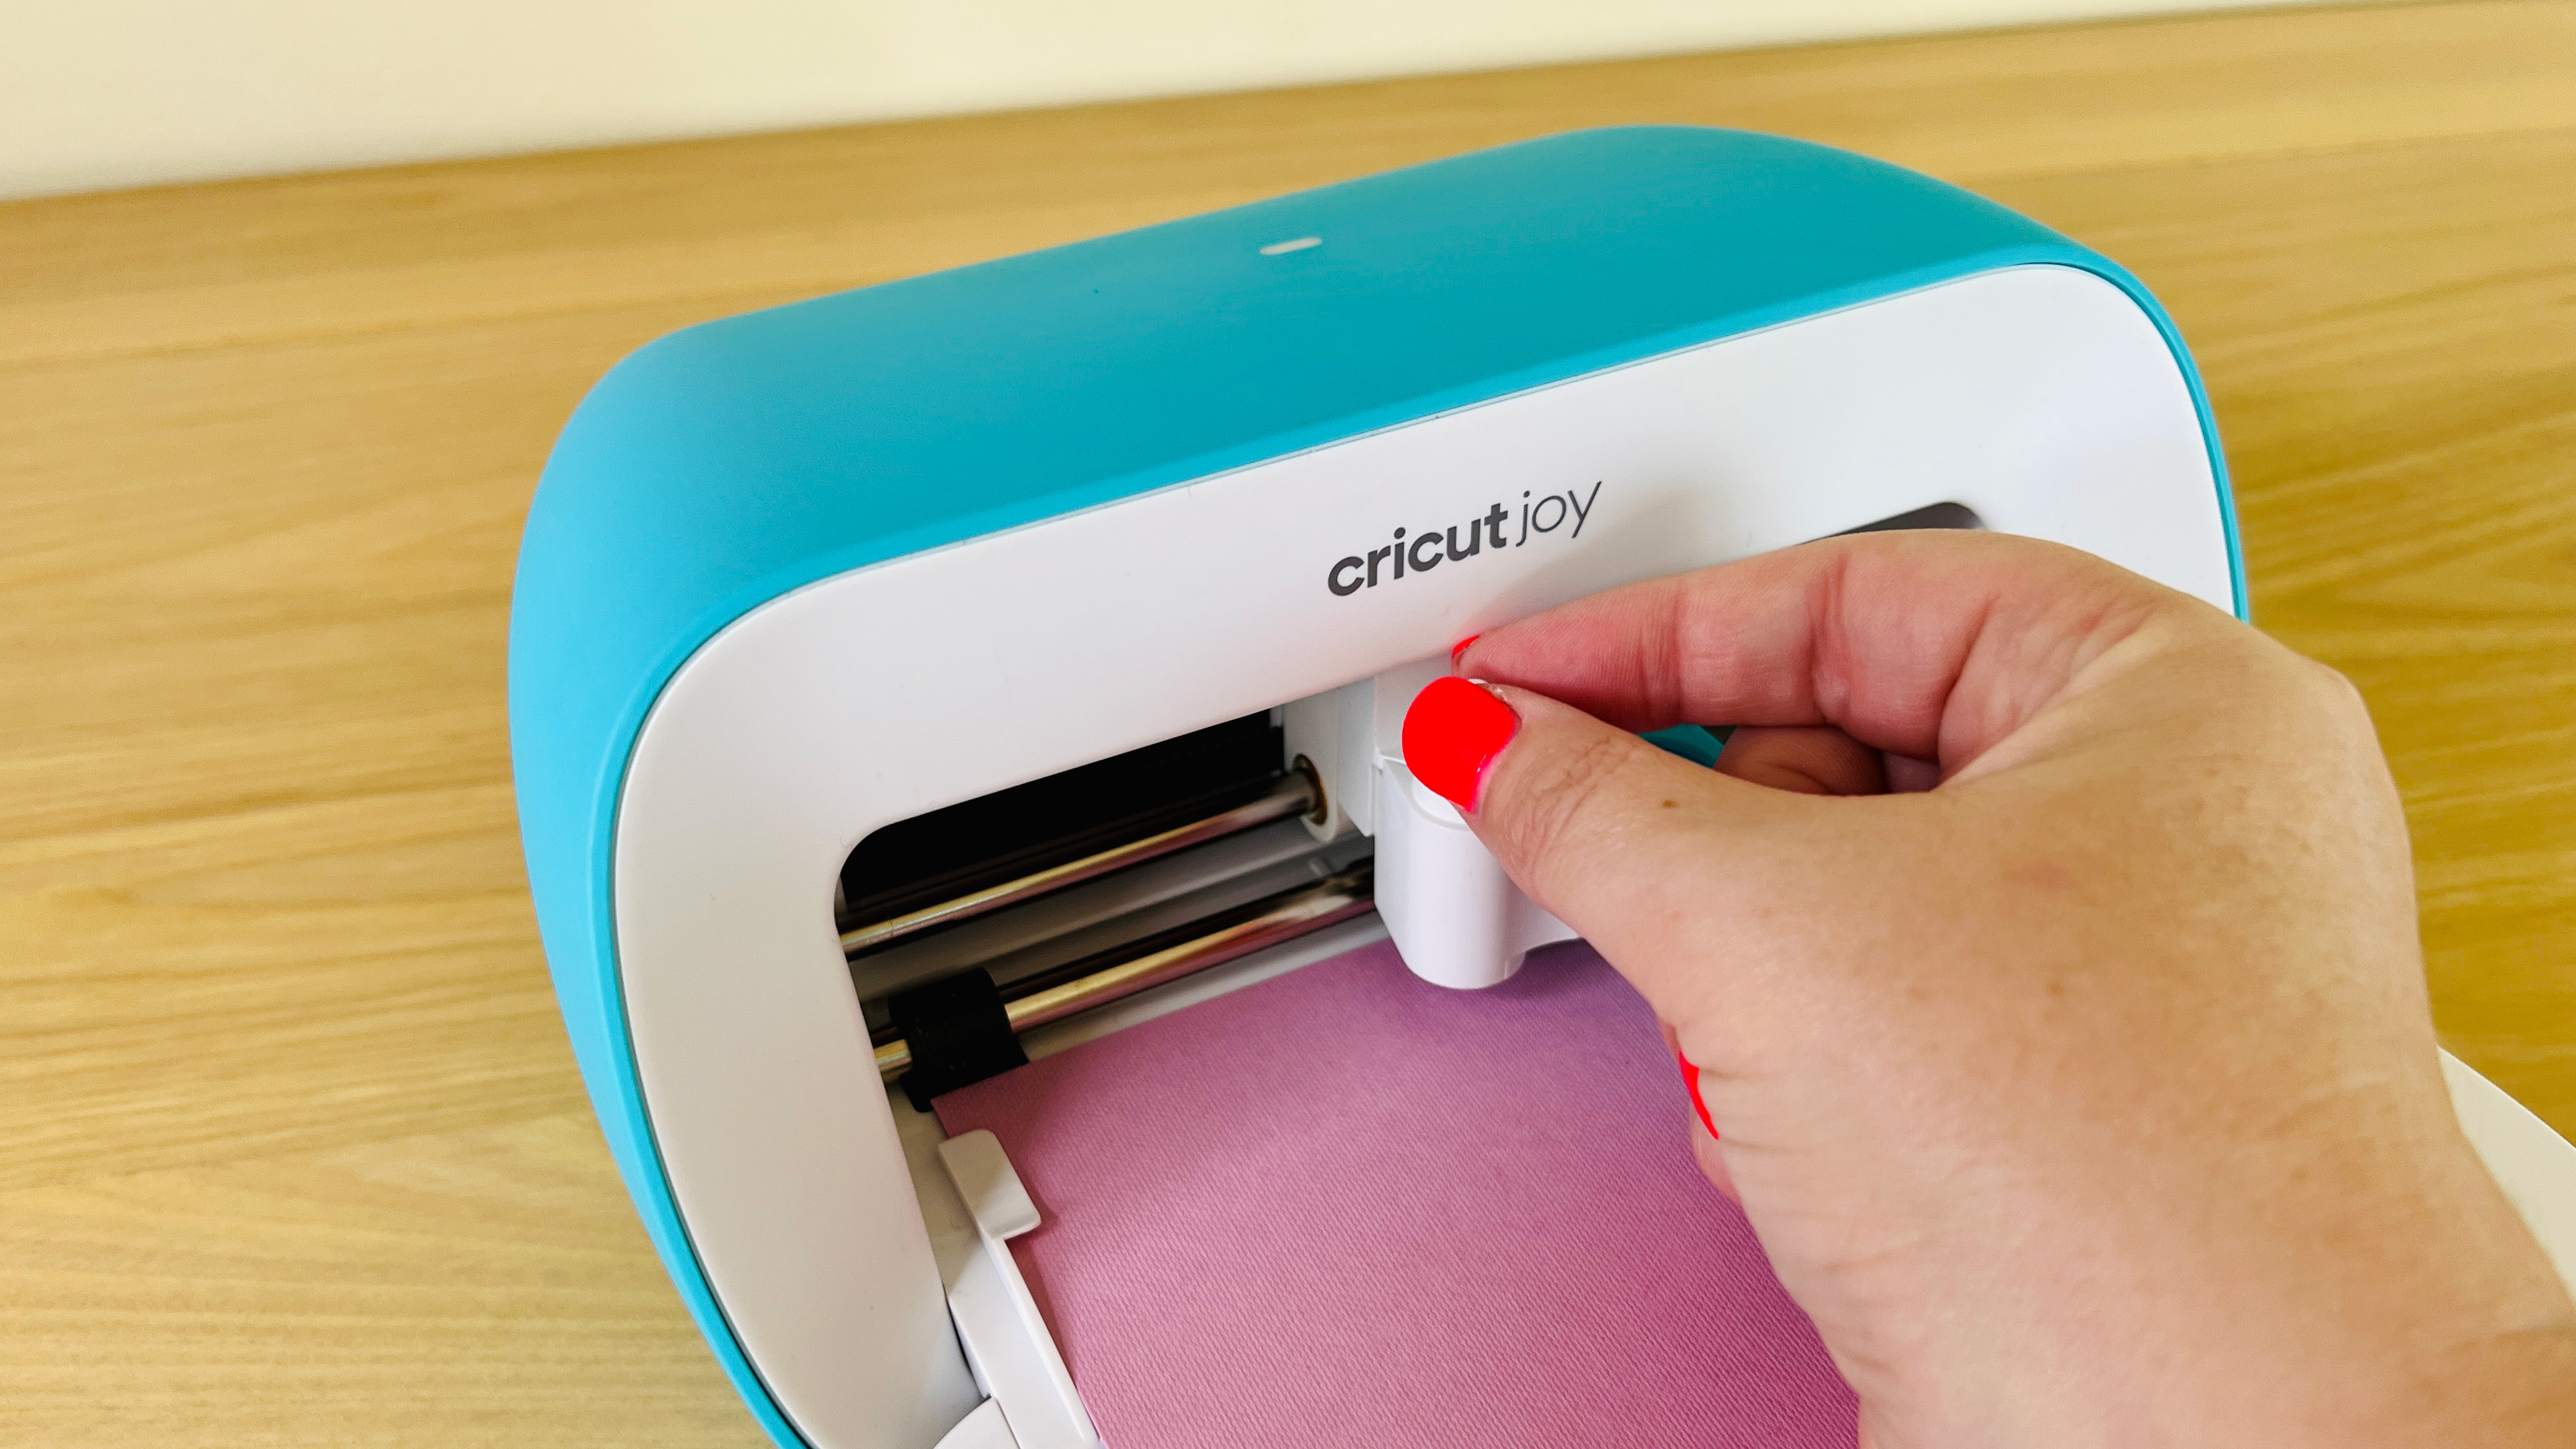 Changing the blade on the Cricut Joy